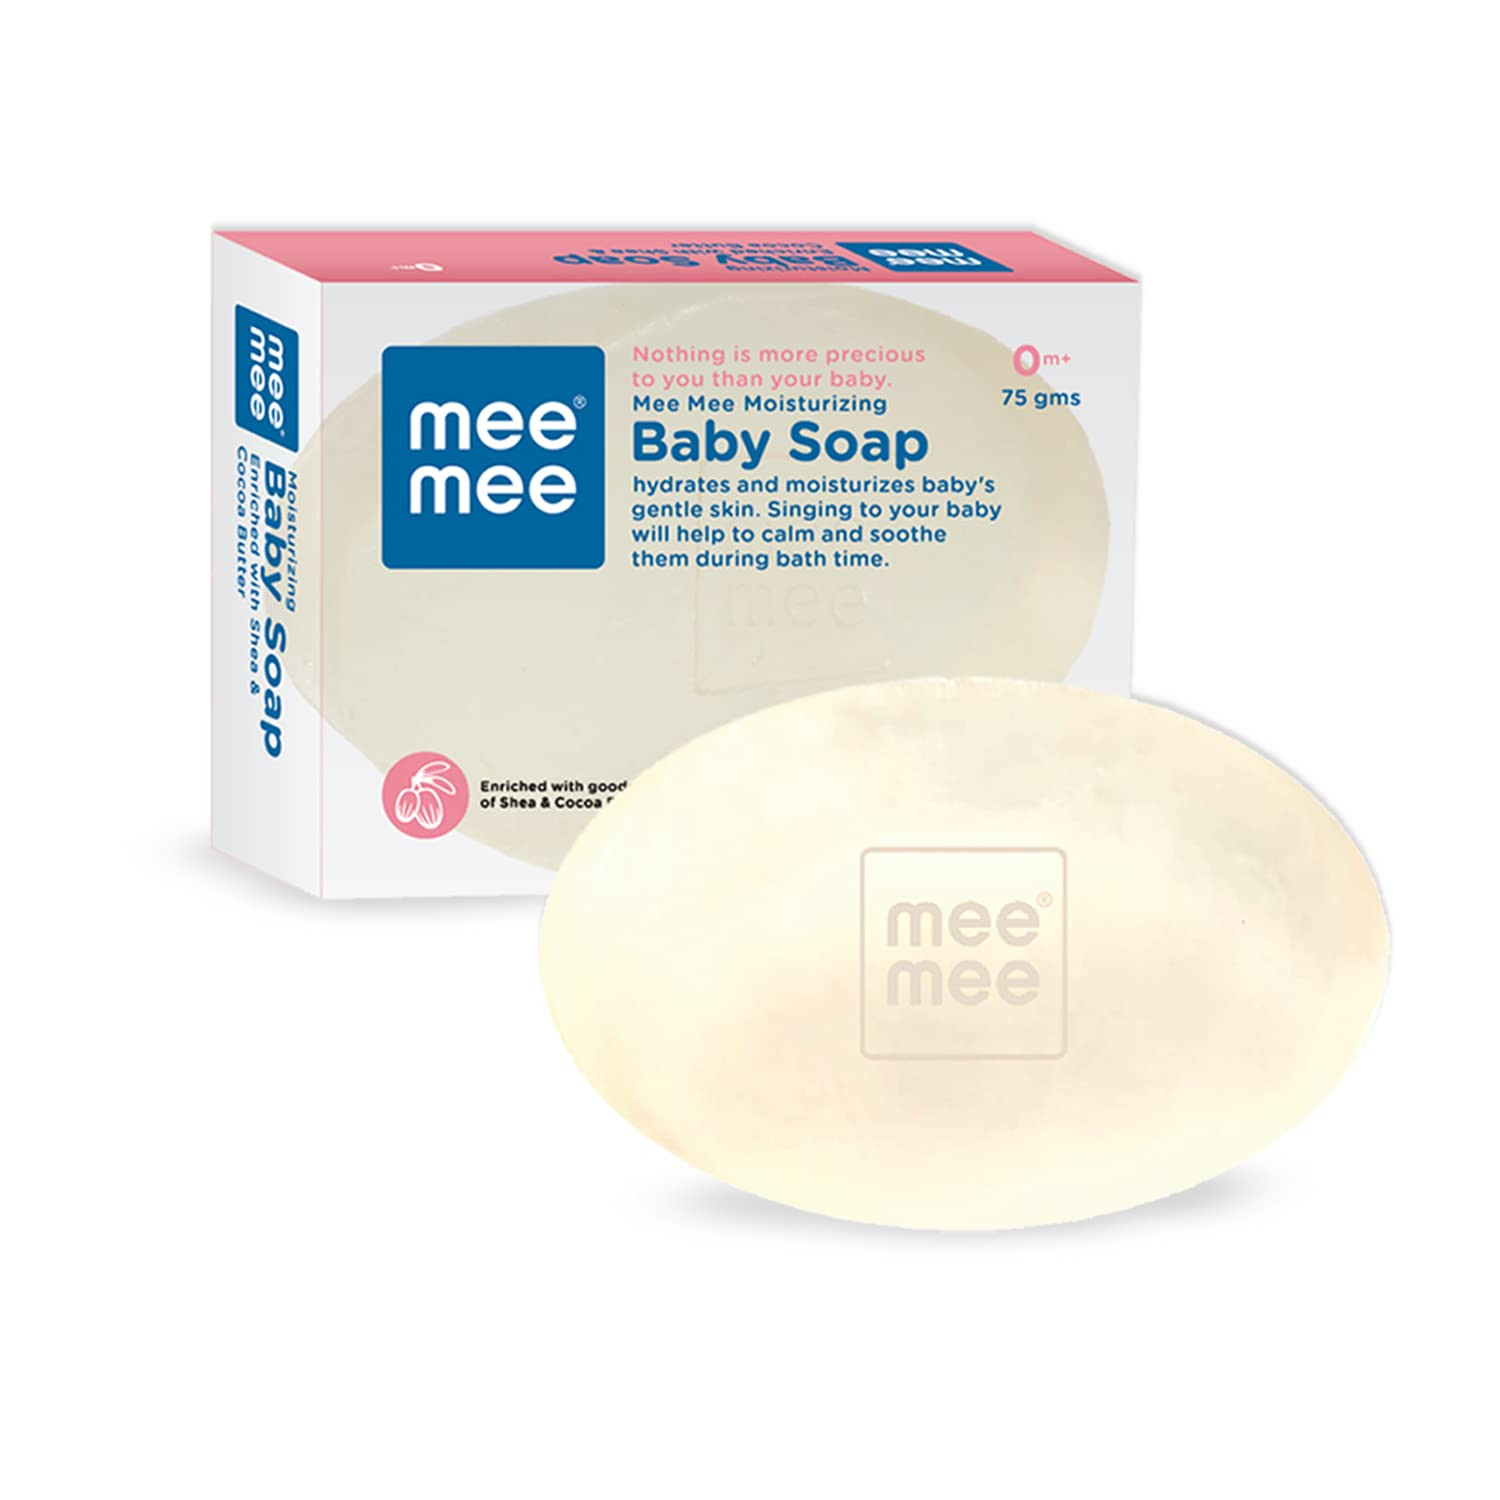 Mee Mee Moisturizing Baby Soap - Chamomile & Olive Bath Bar with 100% Natural Shea & Cocoa Butter.